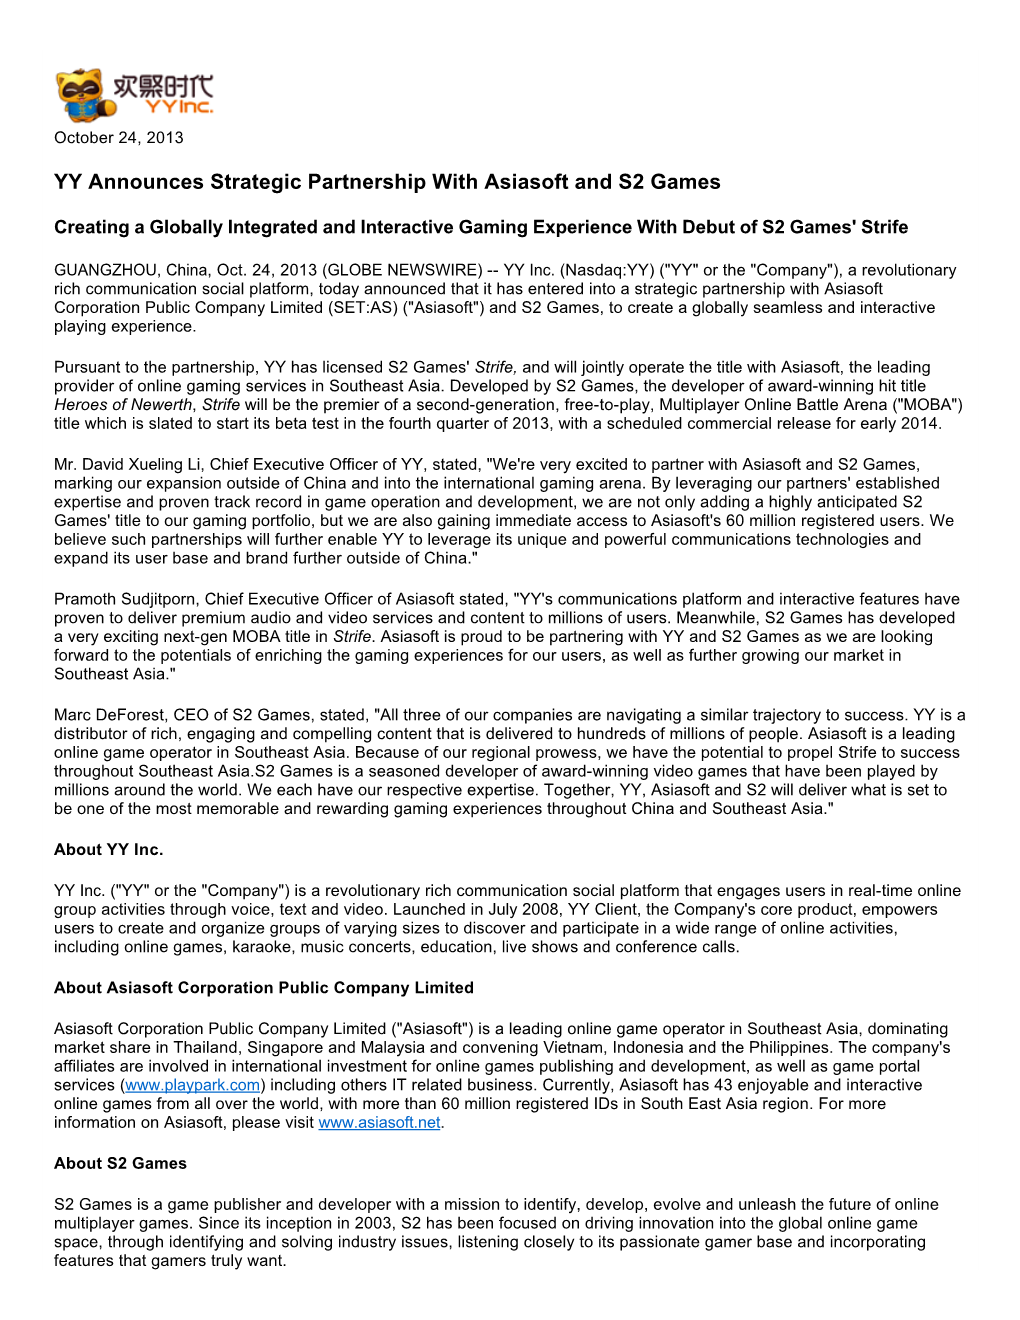 YY Announces Strategic Partnership with Asiasoft and S2 Games